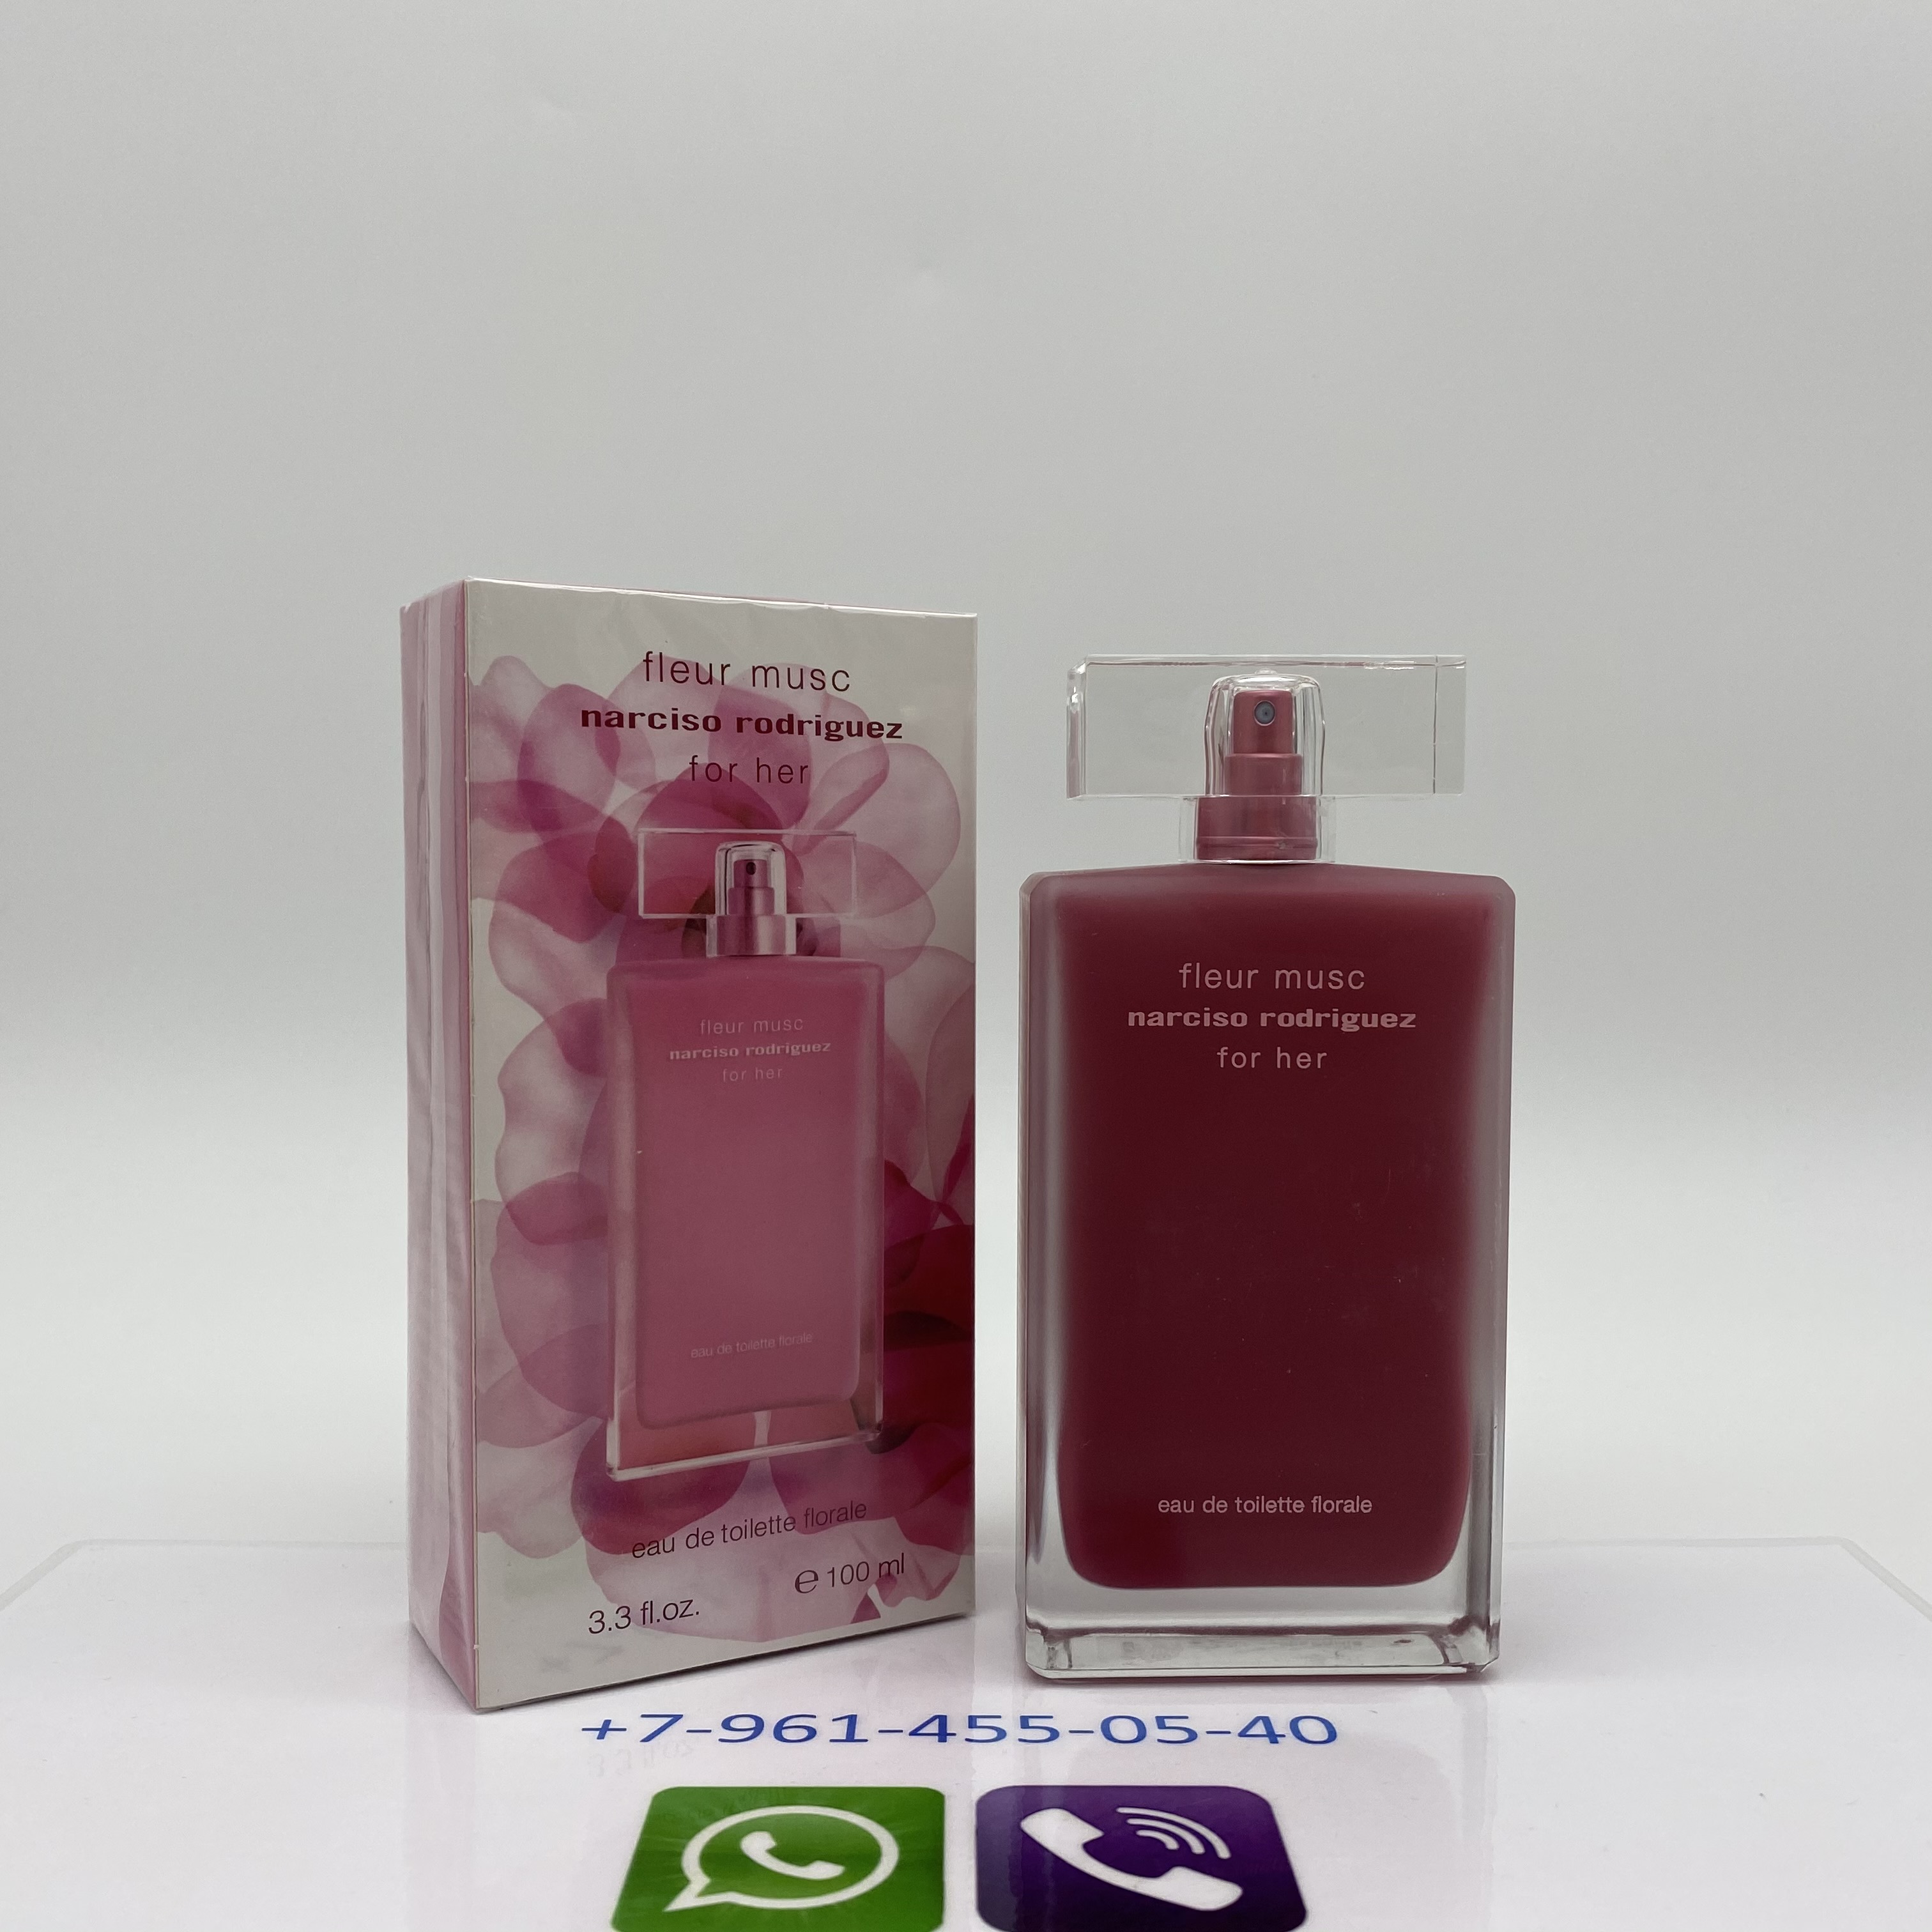 Родригес флер. Narciso Rodriguez fleur Musc for her EDT, 100 ml (Luxe евро). Narciso Rodriguez fleur Musc for her Eau de Toilette Florale. Fleur Musc Narciso Rodriguez for her. Narciso Rodriguez for her fleur Musc Florale.